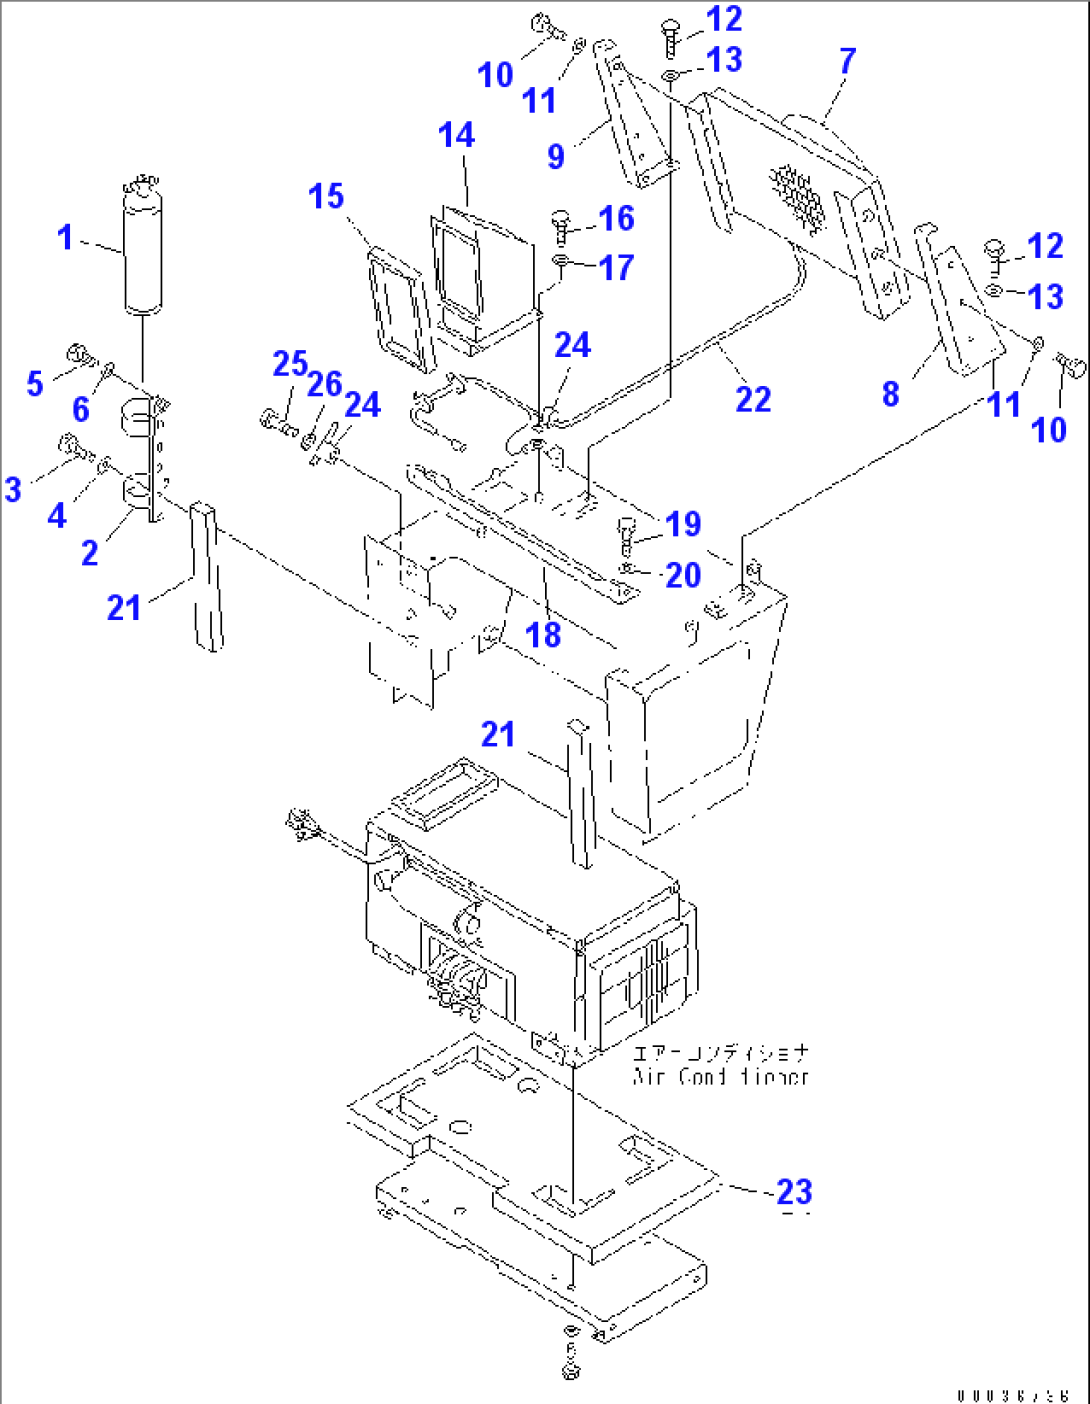 AIR CONDITIONER (CONDENSER AND MOUNTING)(#90001-)